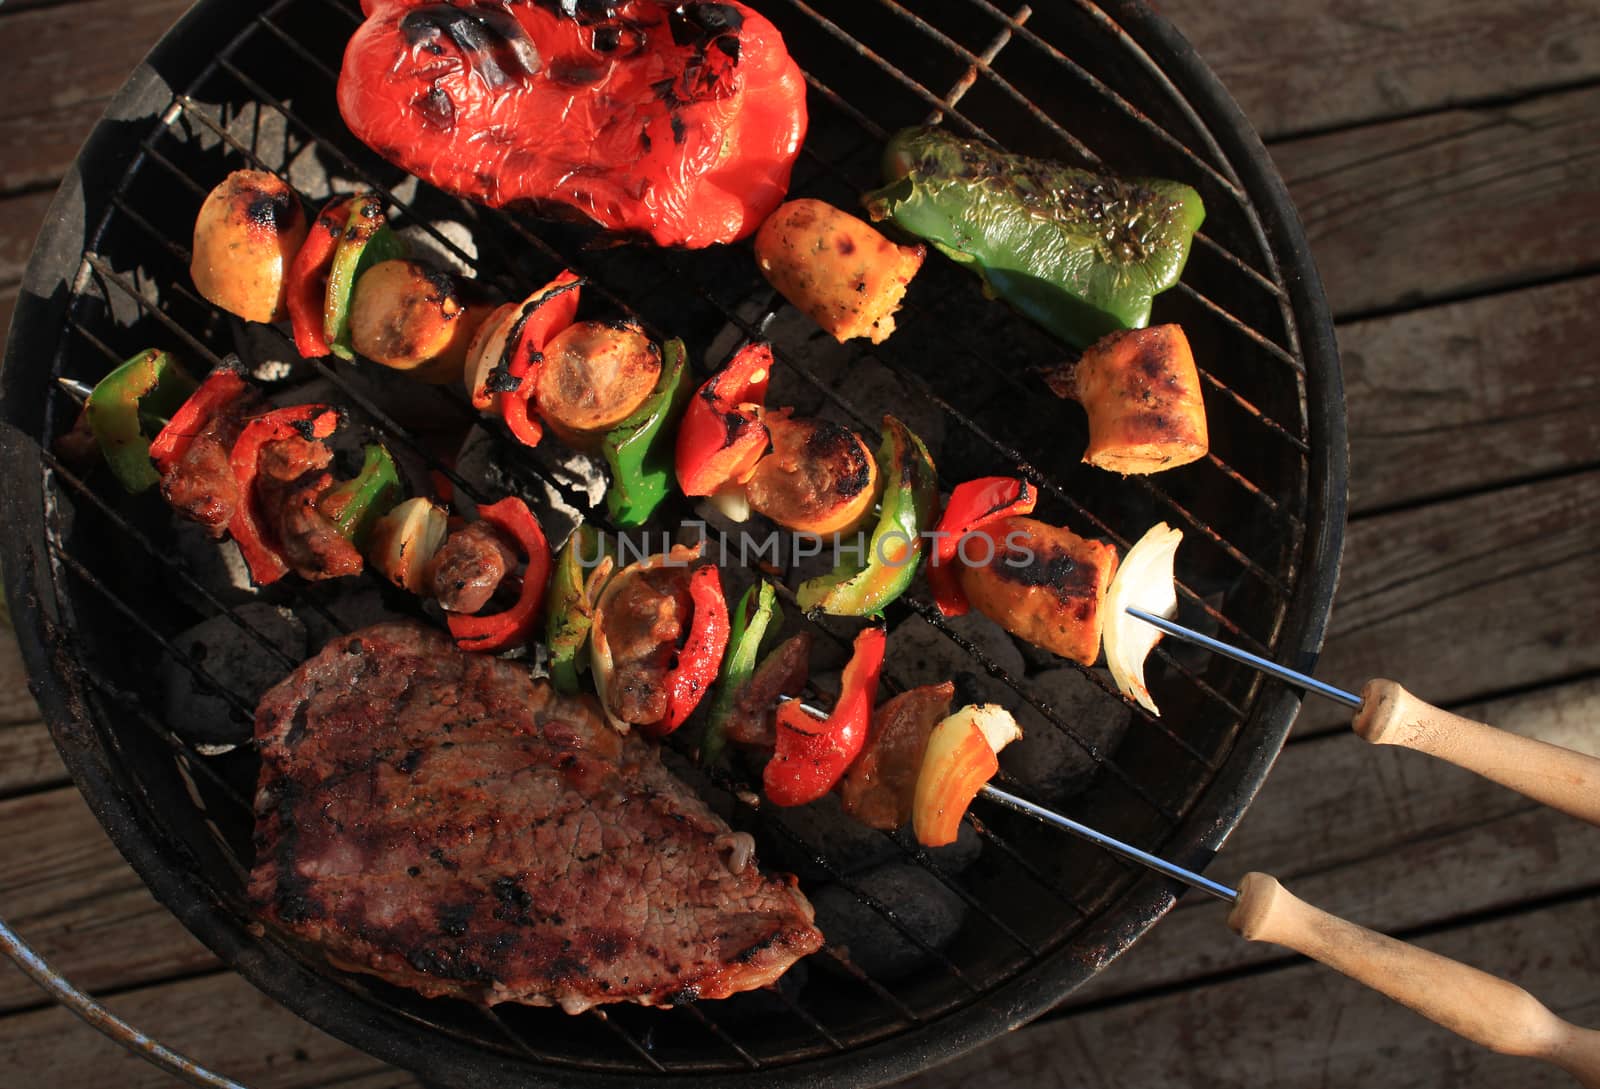 Barbecuing shish kabobs with sausage, steak and peppers, in green and red on a portable charcoal bbq